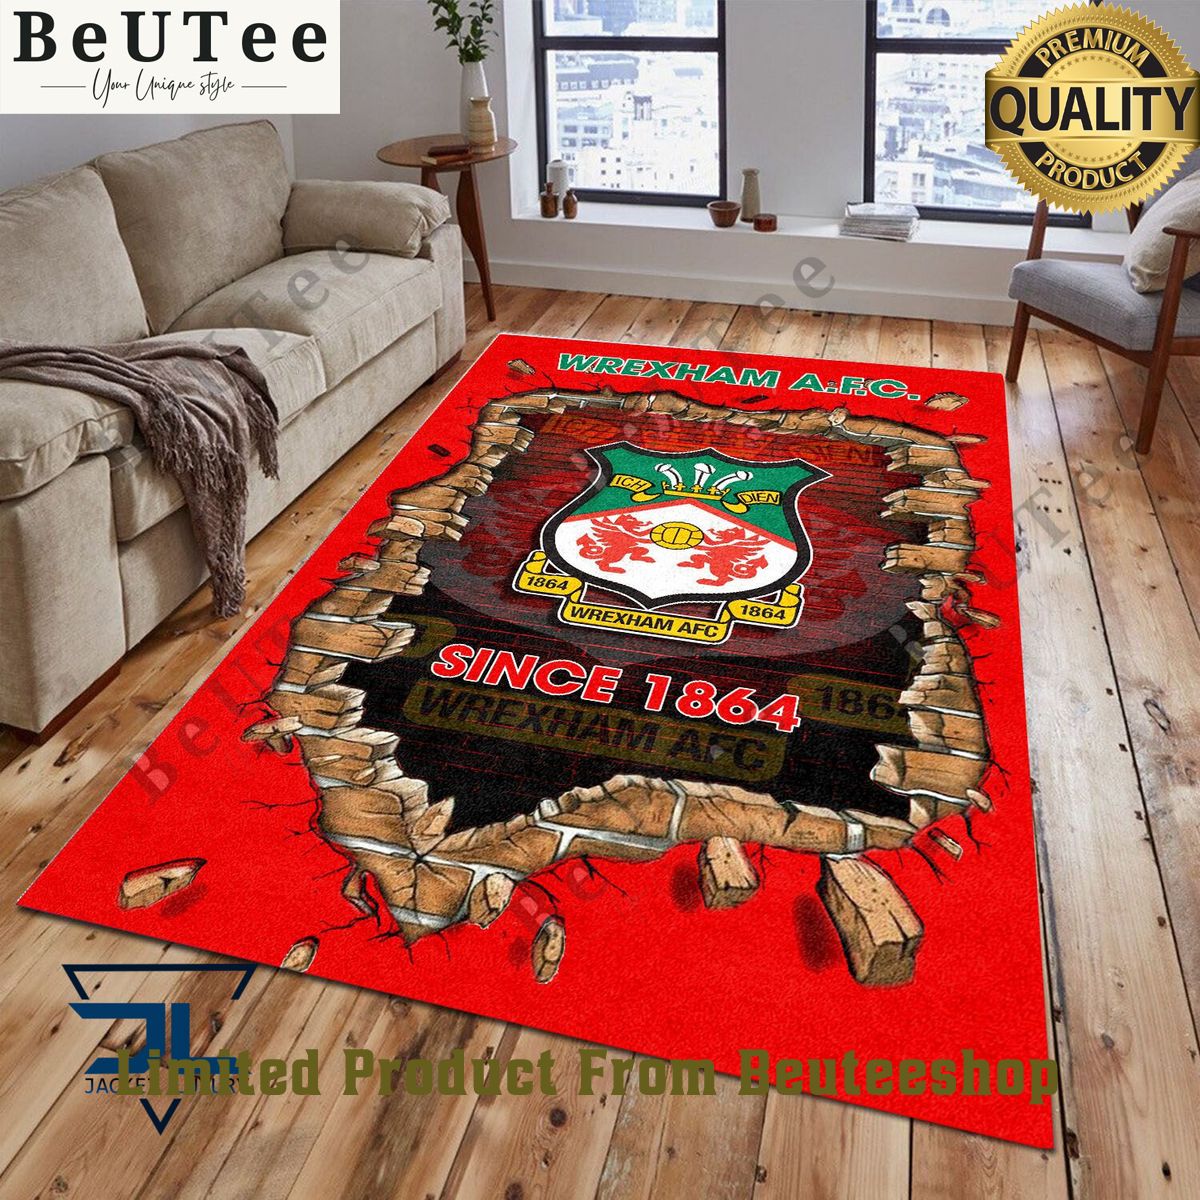 wrexham afc 1865 league two limited carpet living room 1 sweaH.jpg